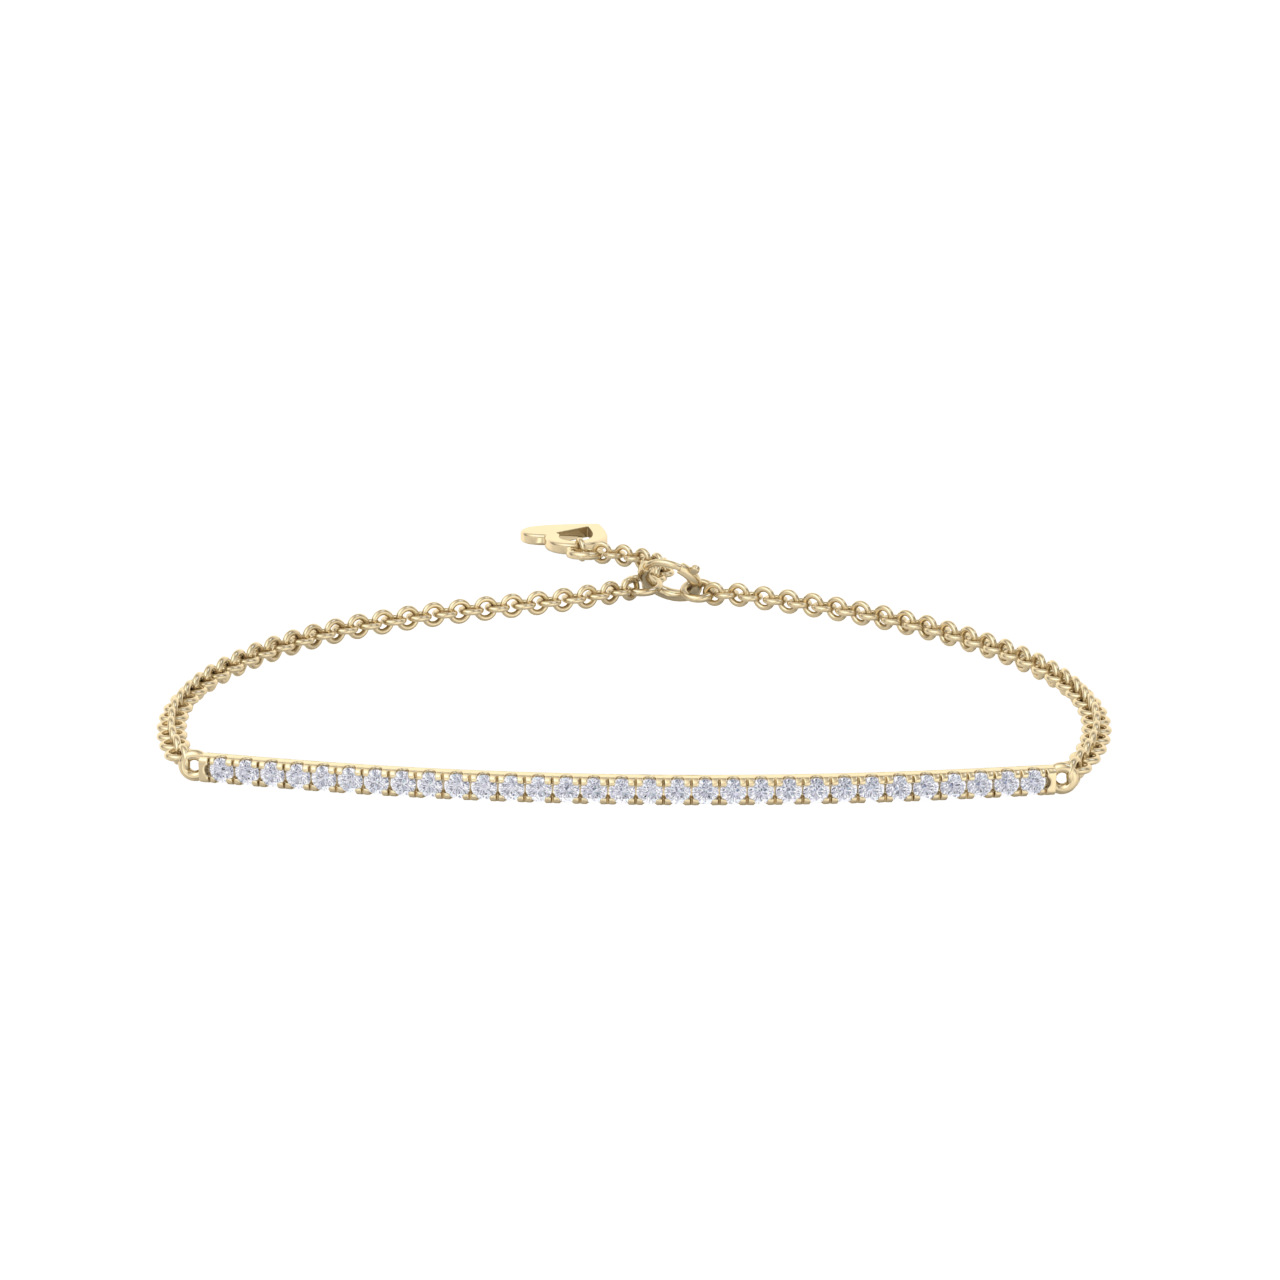 Small bar diamond bracelet in yellow gold with white diamonds of 0.11 ct in weight
